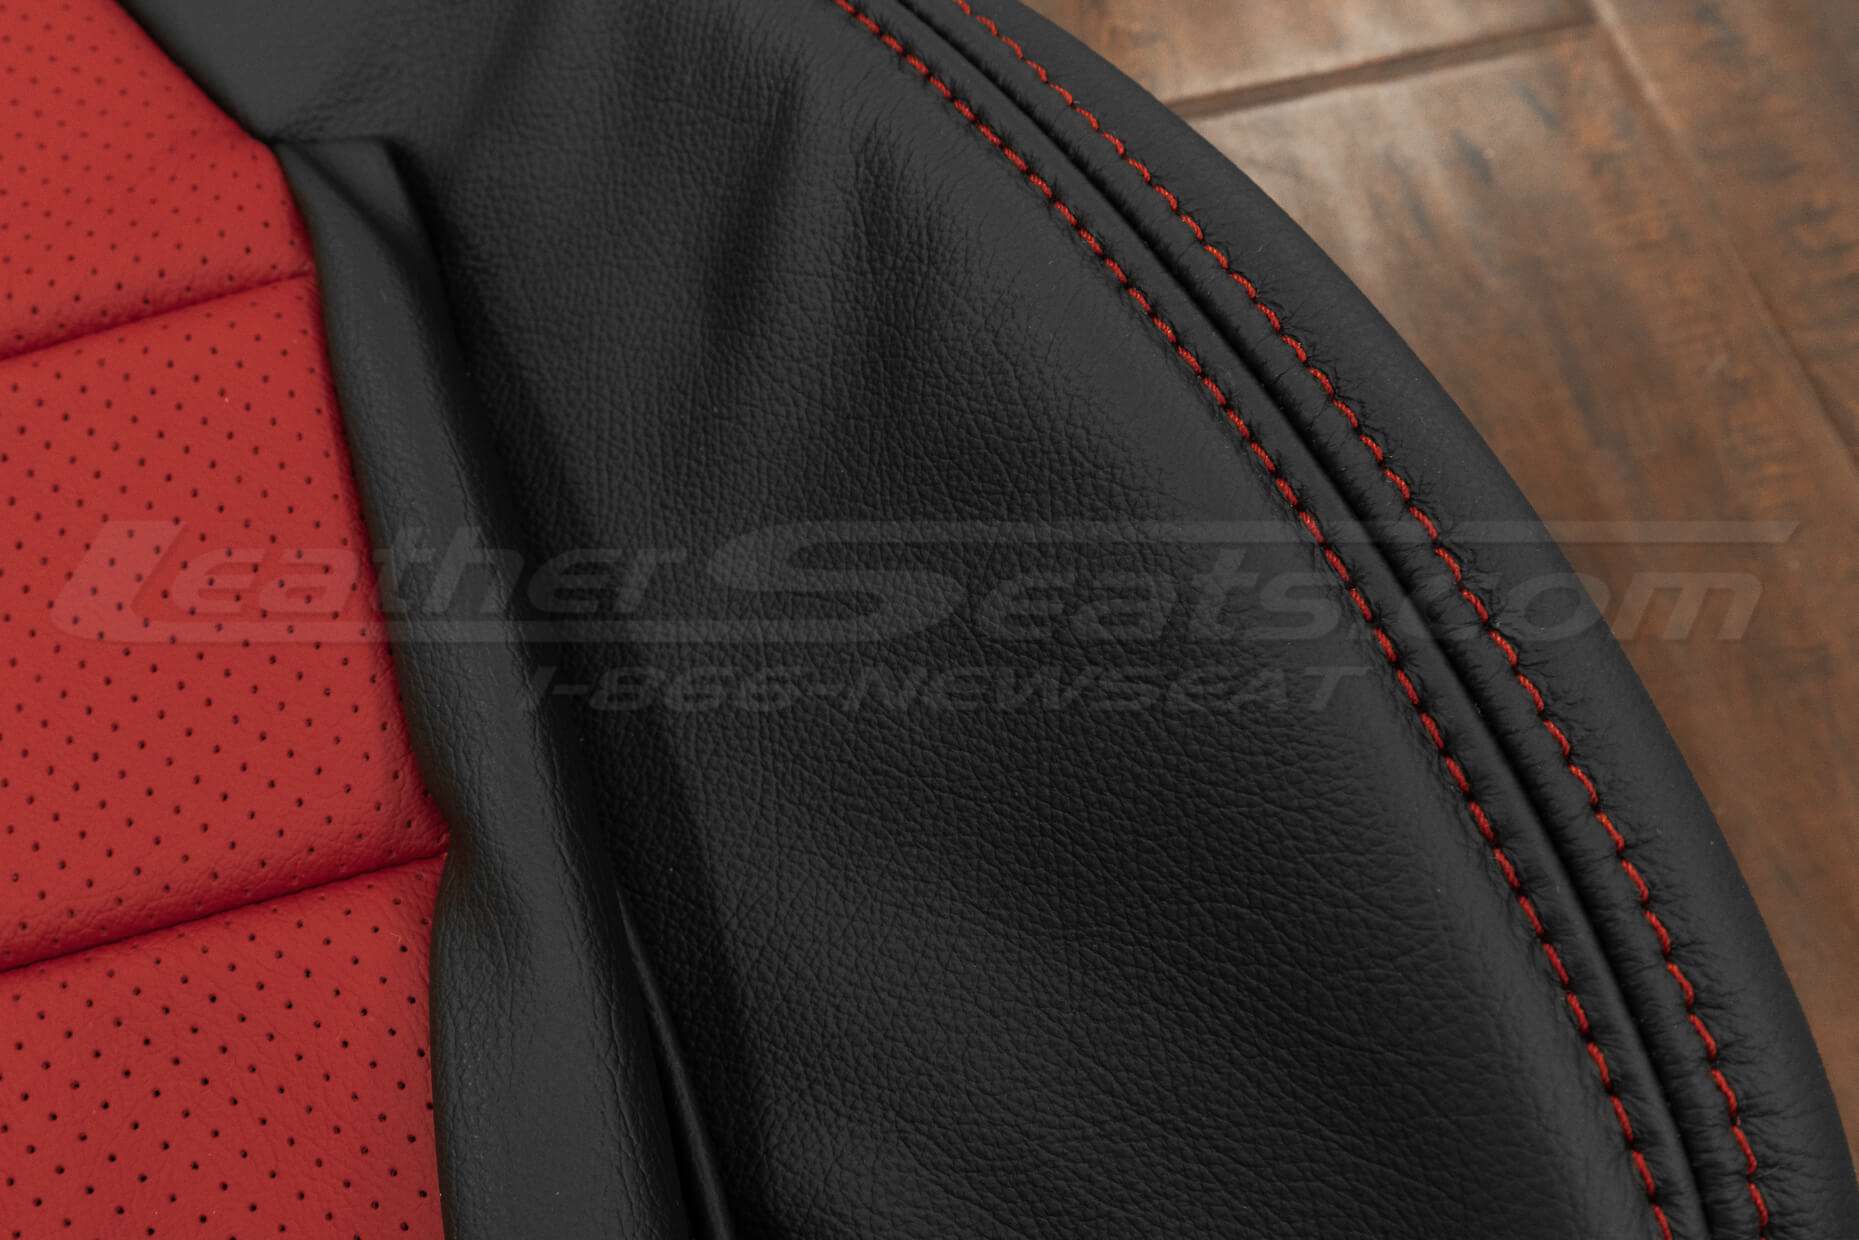 Red double-stitching & Perforated insert